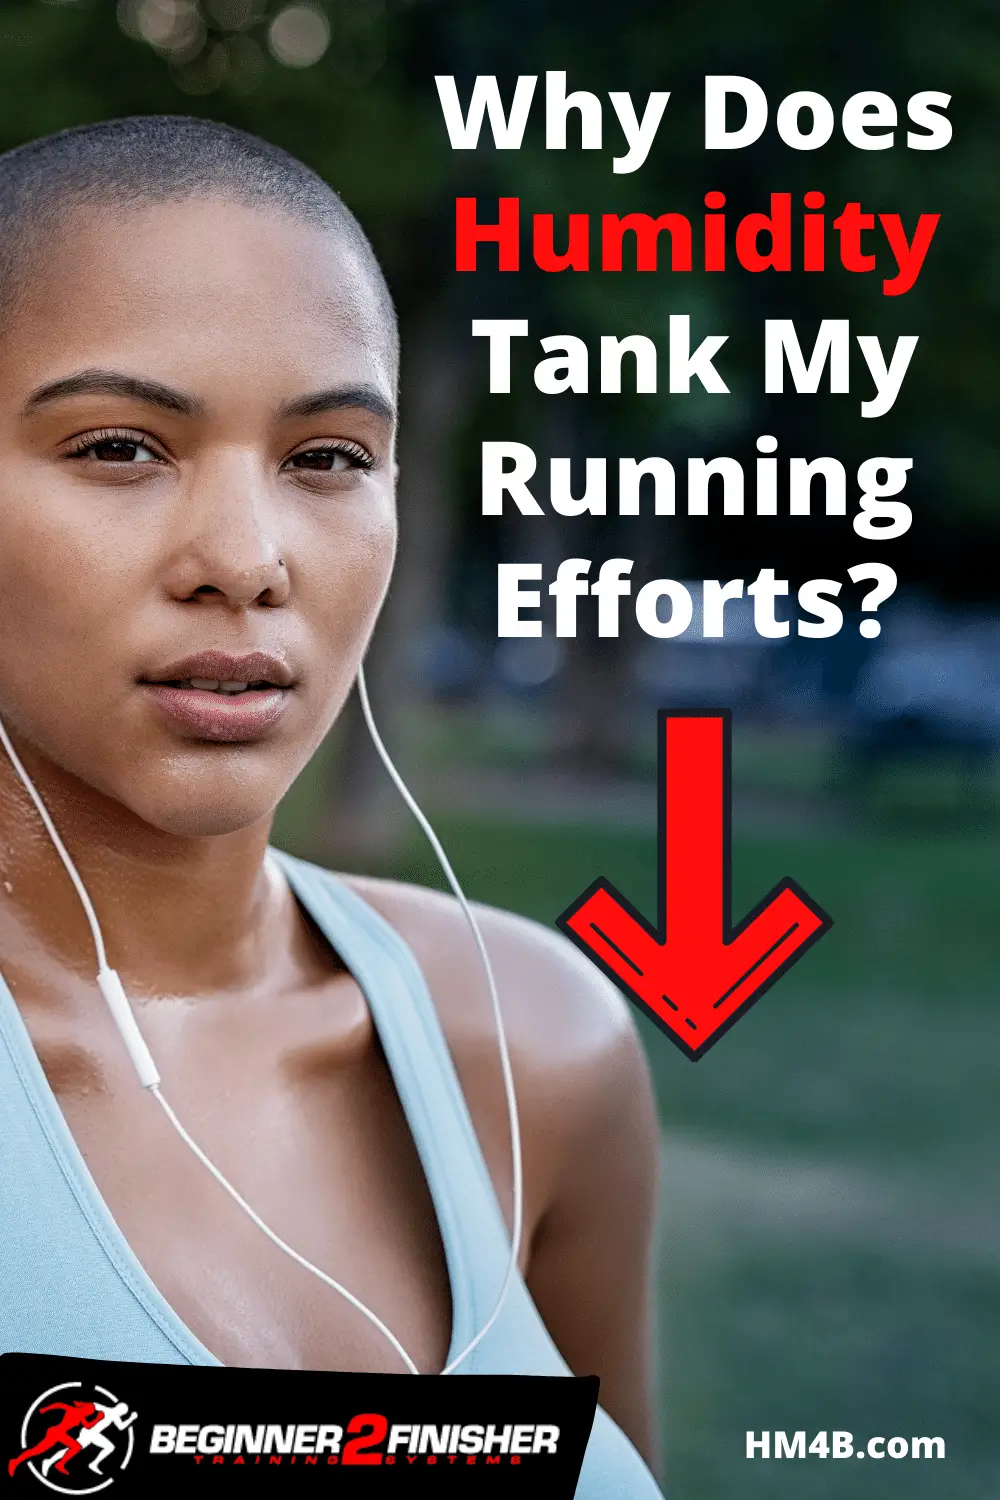 How to run in humidity - 12 key things to keep in mind!